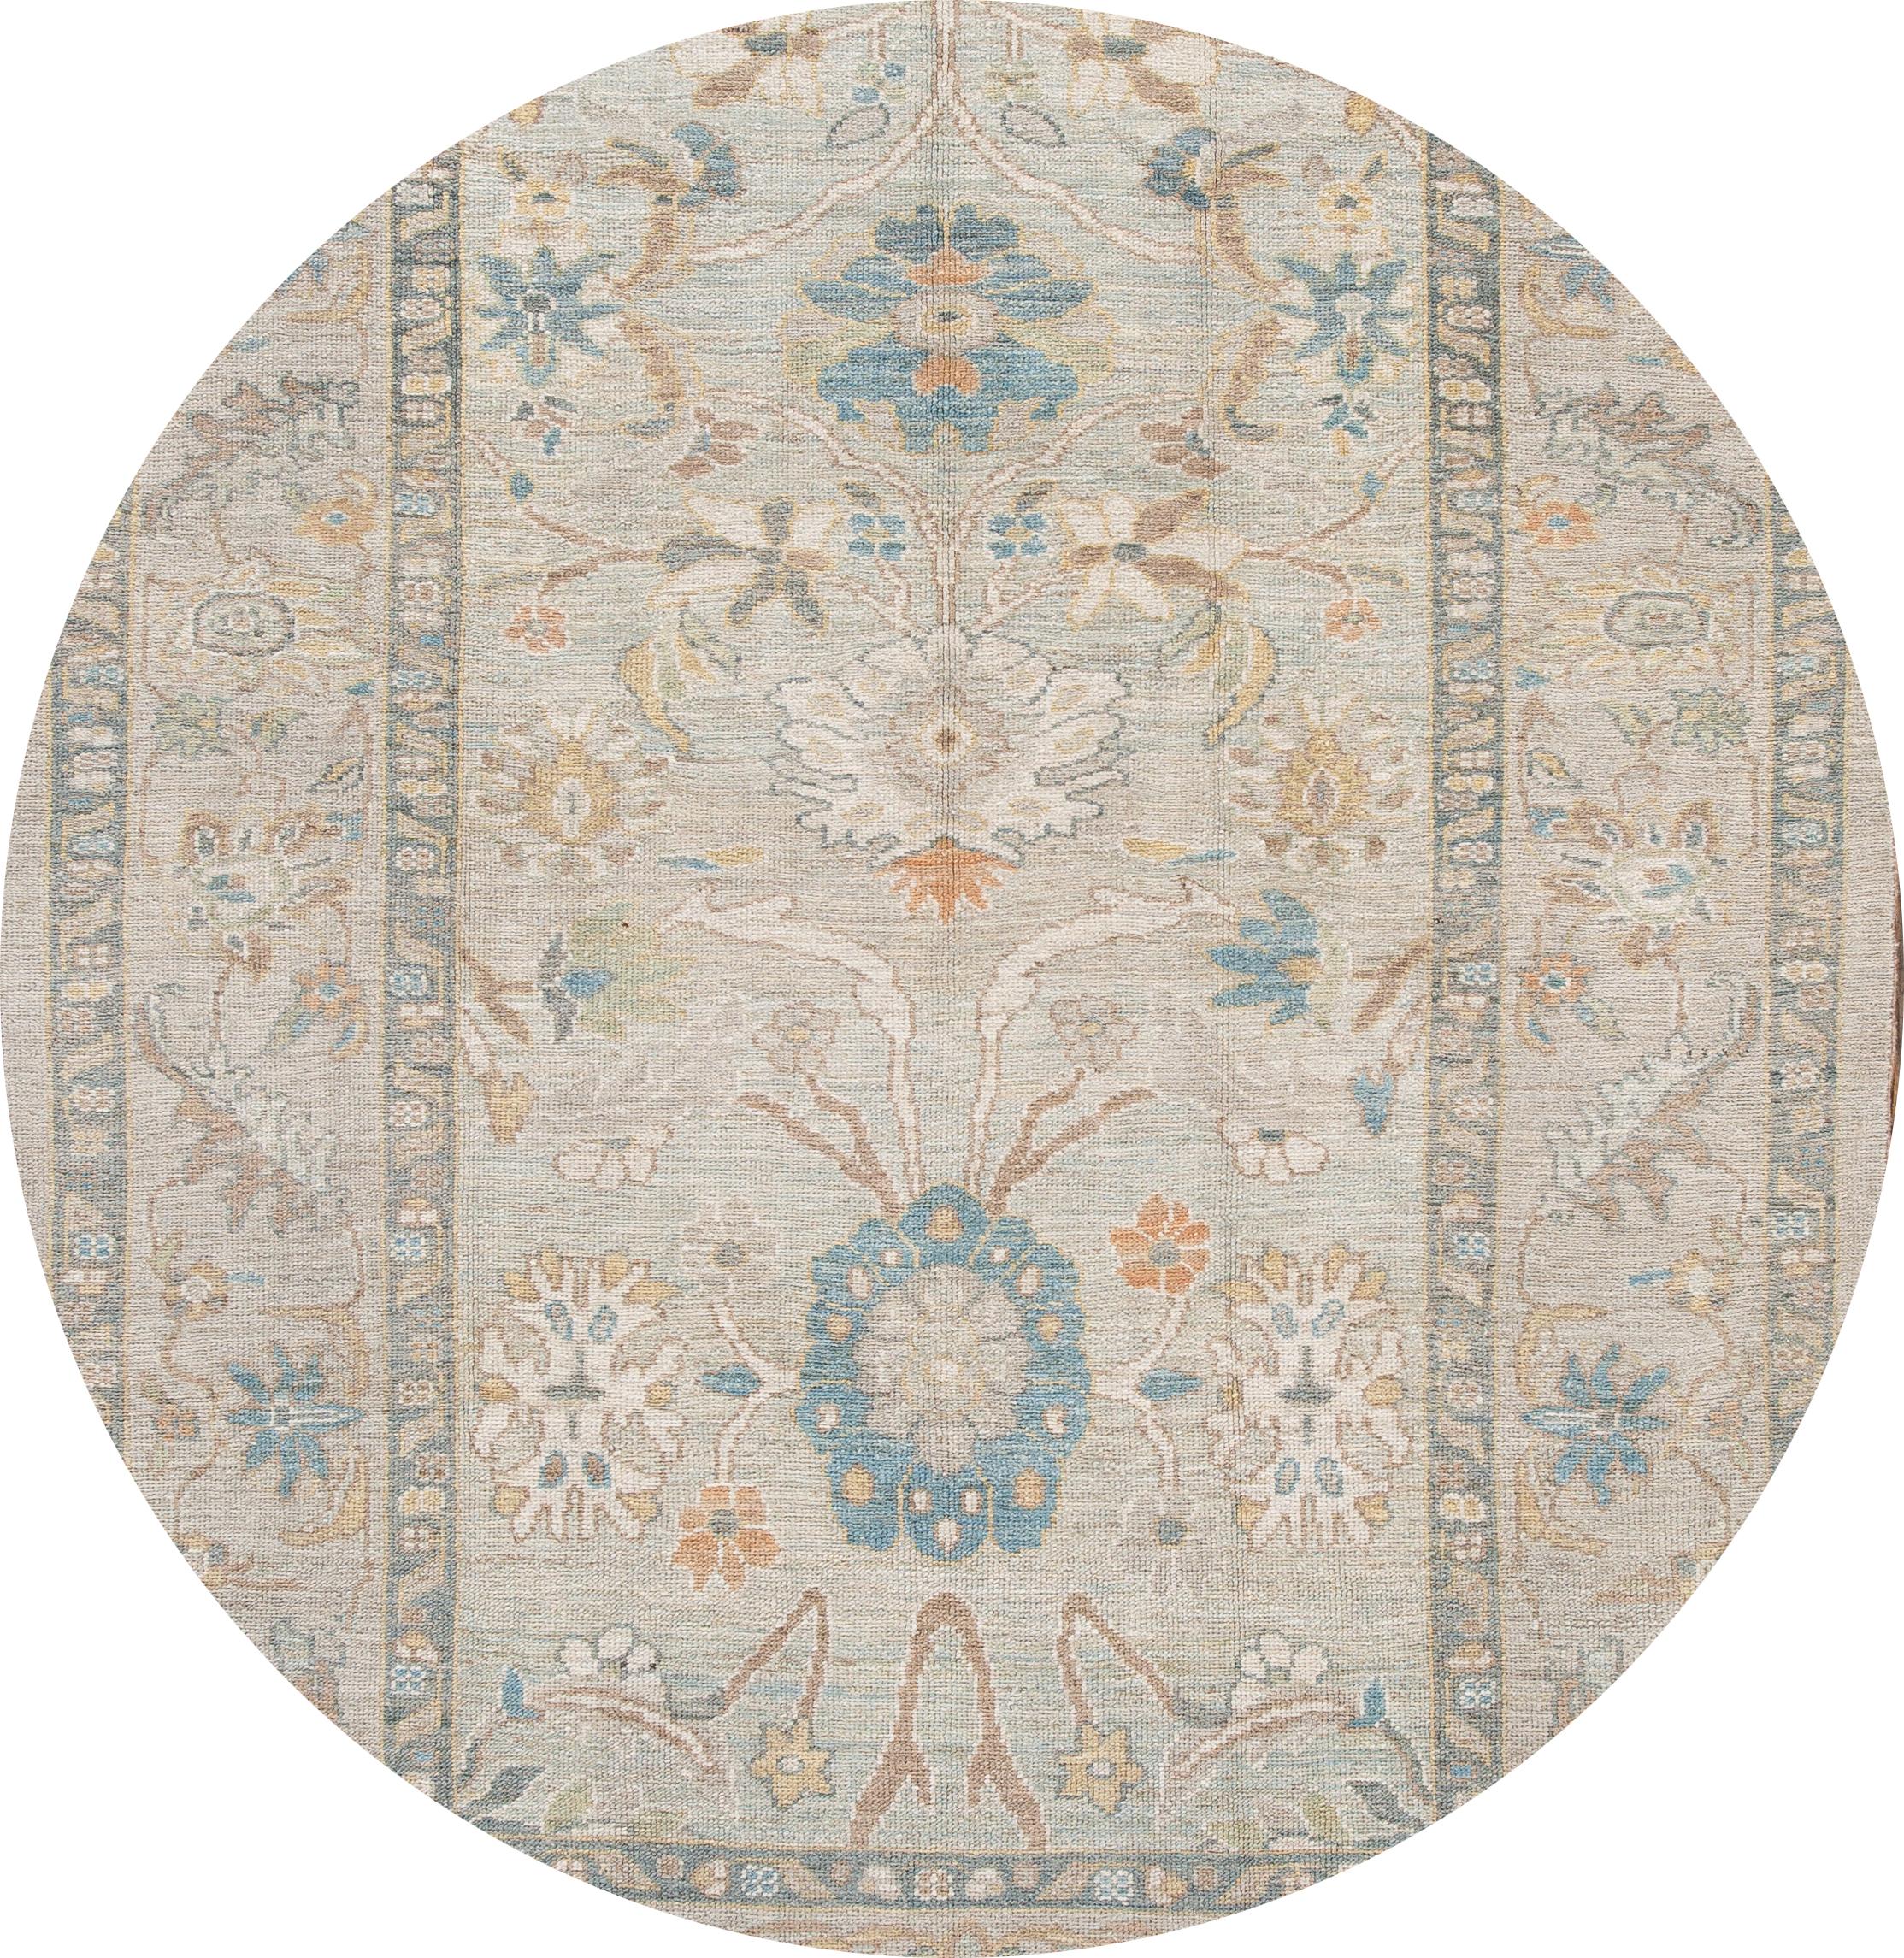 Beautiful contemporary Sultanabad rug, hand knotted wool with a light gray field, slim blue frame, brown, blue and ivory accents in all-over Classic floral design.
This rug measures: 6'5